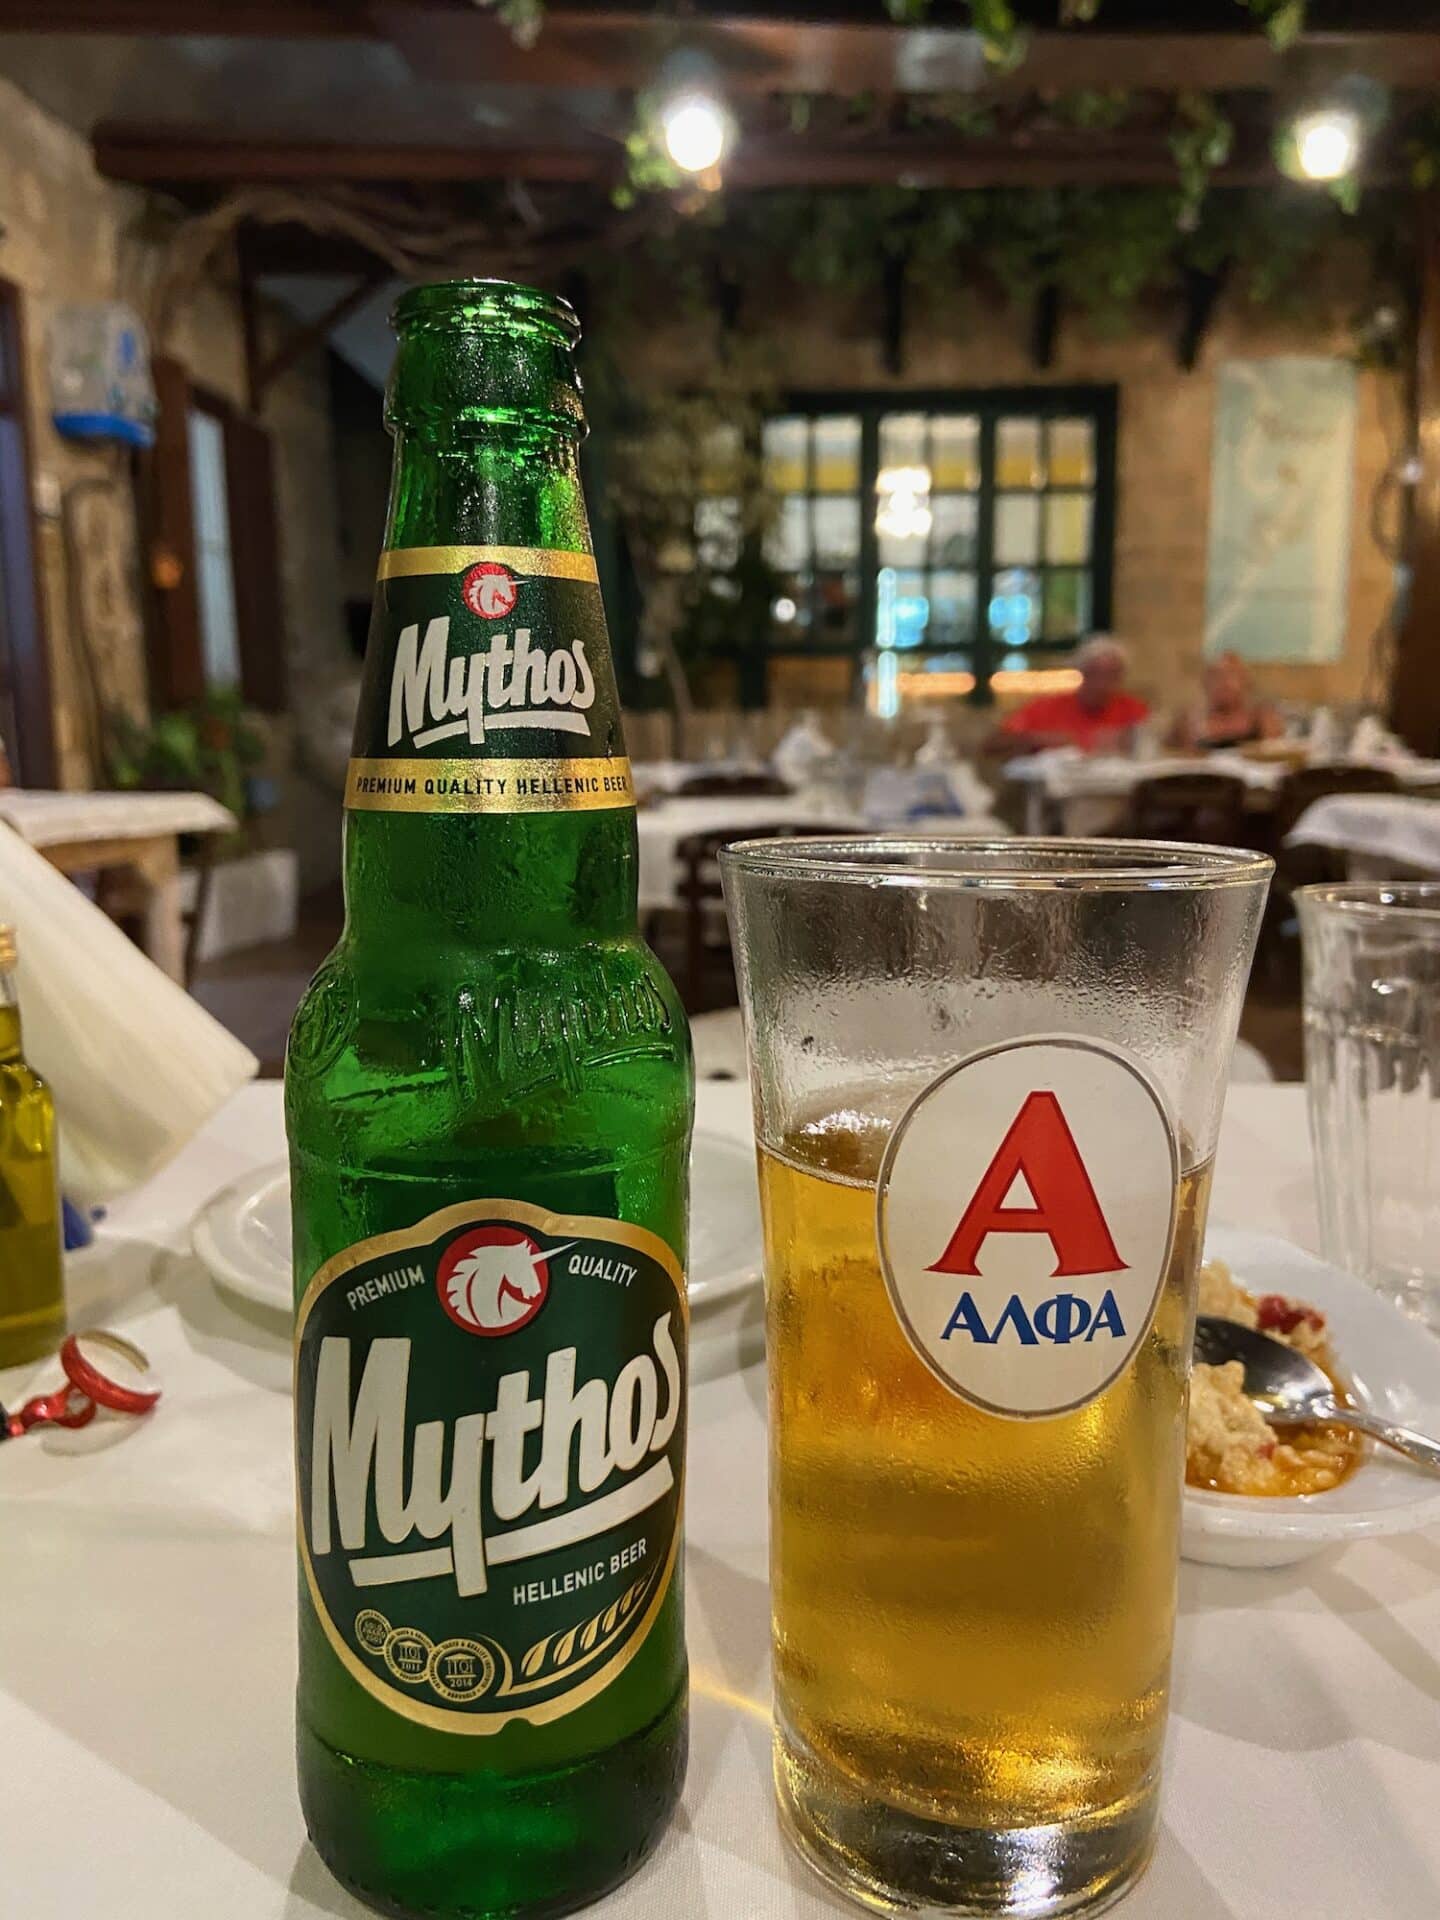 A close-up of a cold Mythos beer bottle beside a glass half-filled with beer, with a blurry taverna scene in the background, capturing the essence of a relaxed evening in Milos.